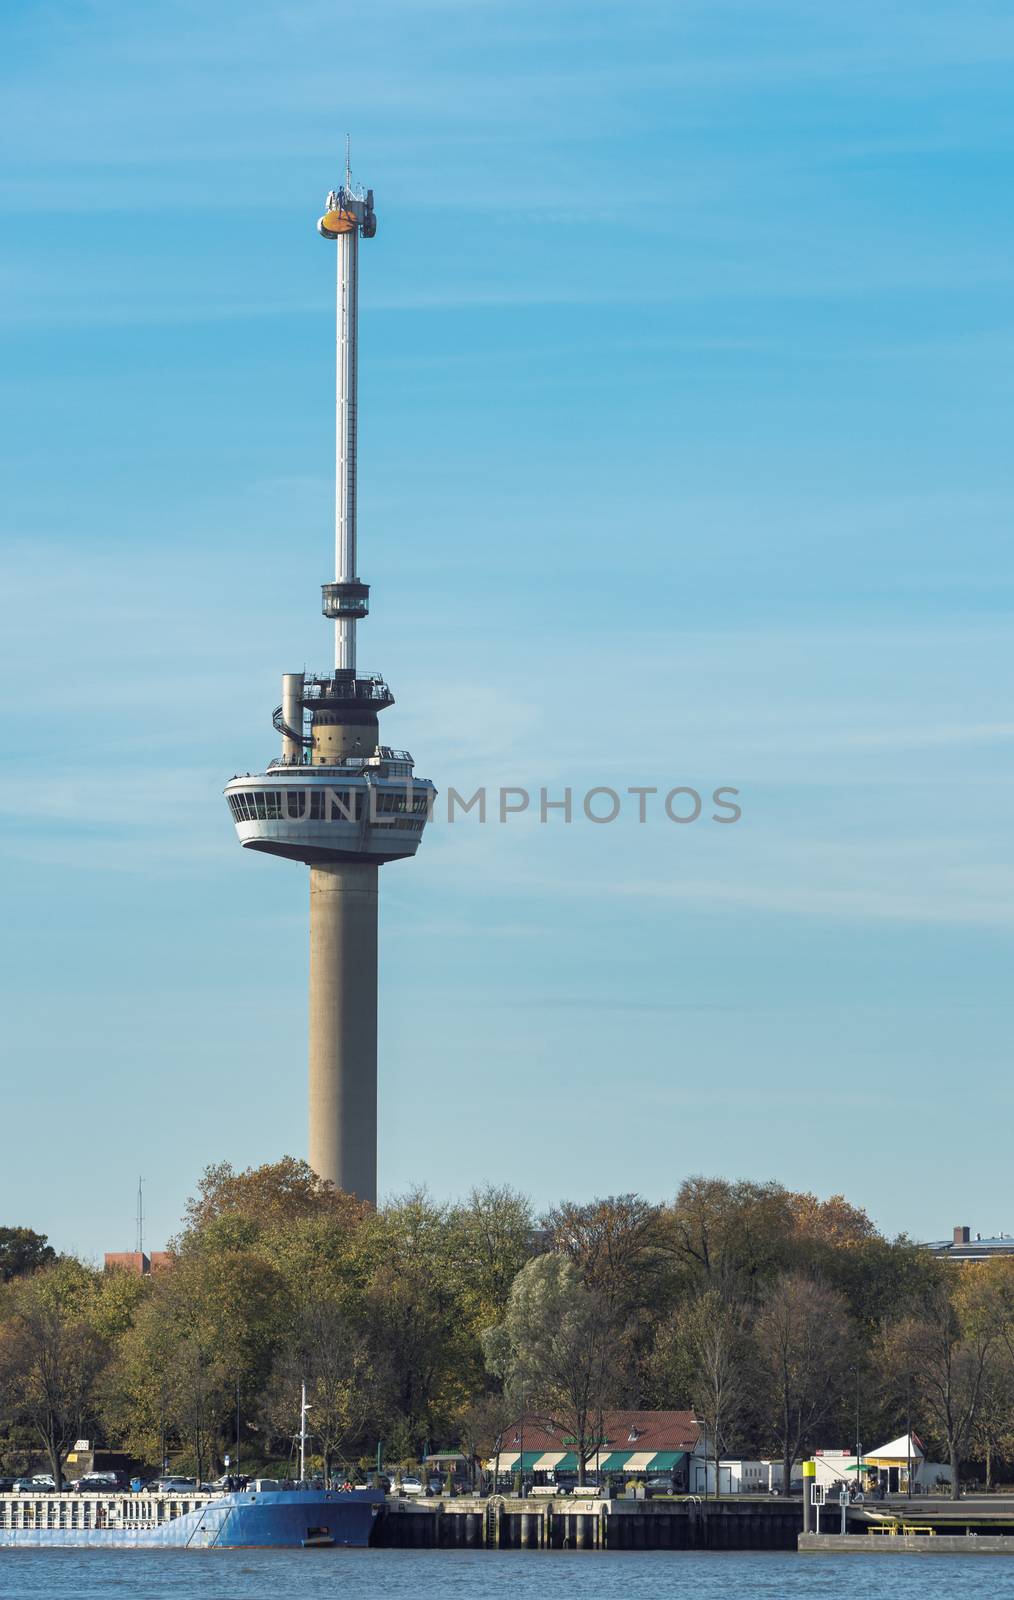 the euromast tower in rotterdam by compuinfoto